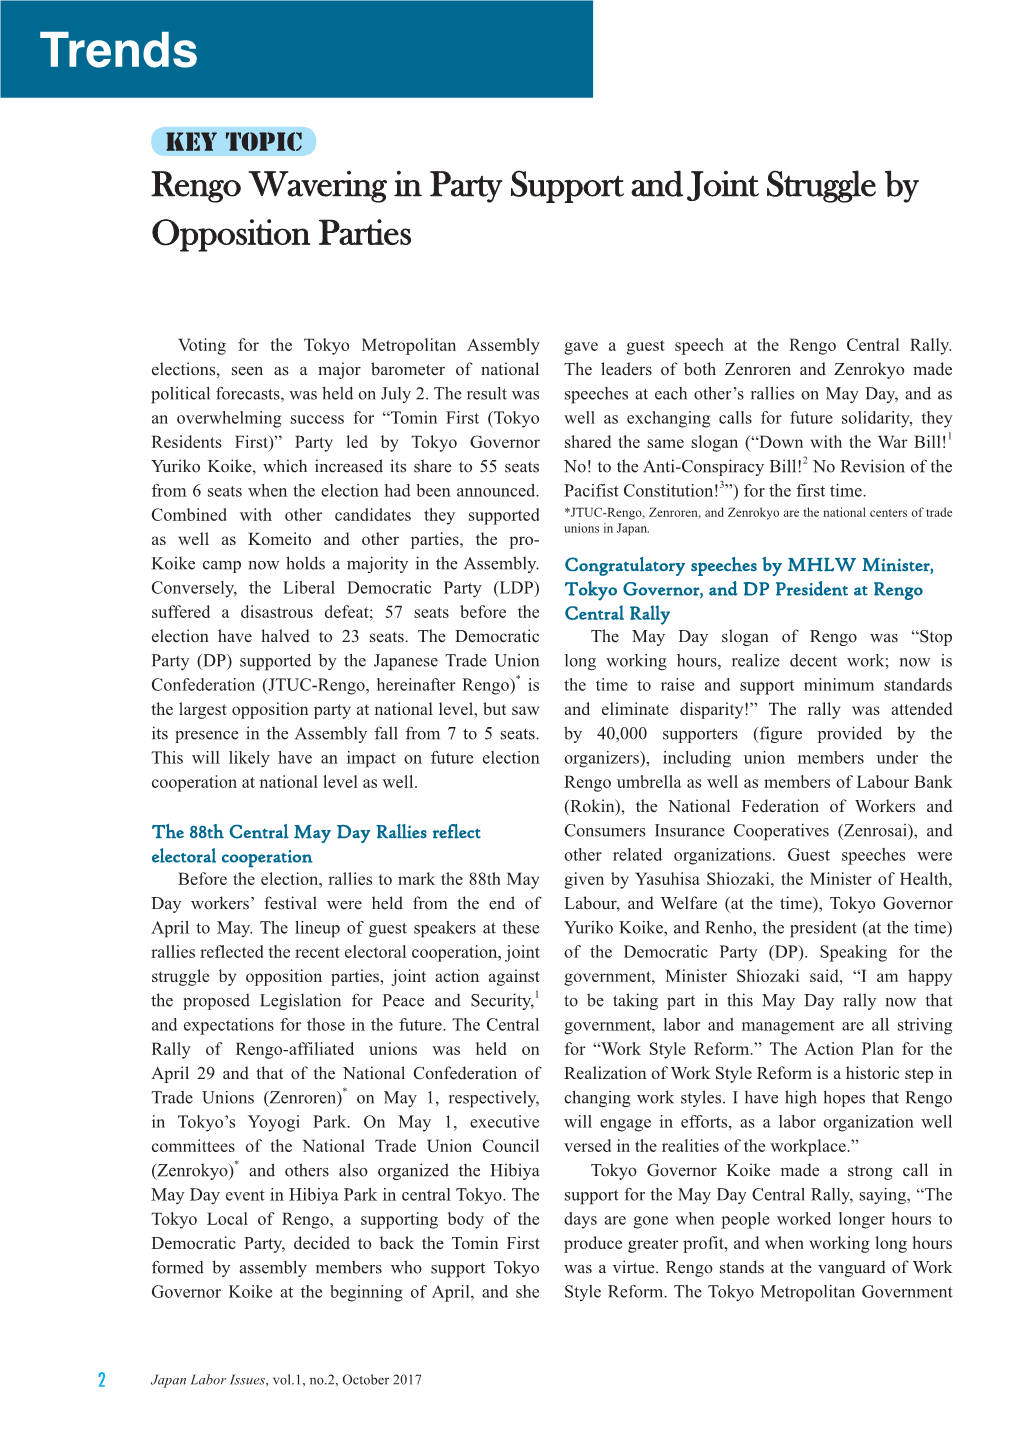 Rengo Wavering in Party Support and Joint Struggle by Opposition Parties, Japan Labor Issues Vol.1 No.2